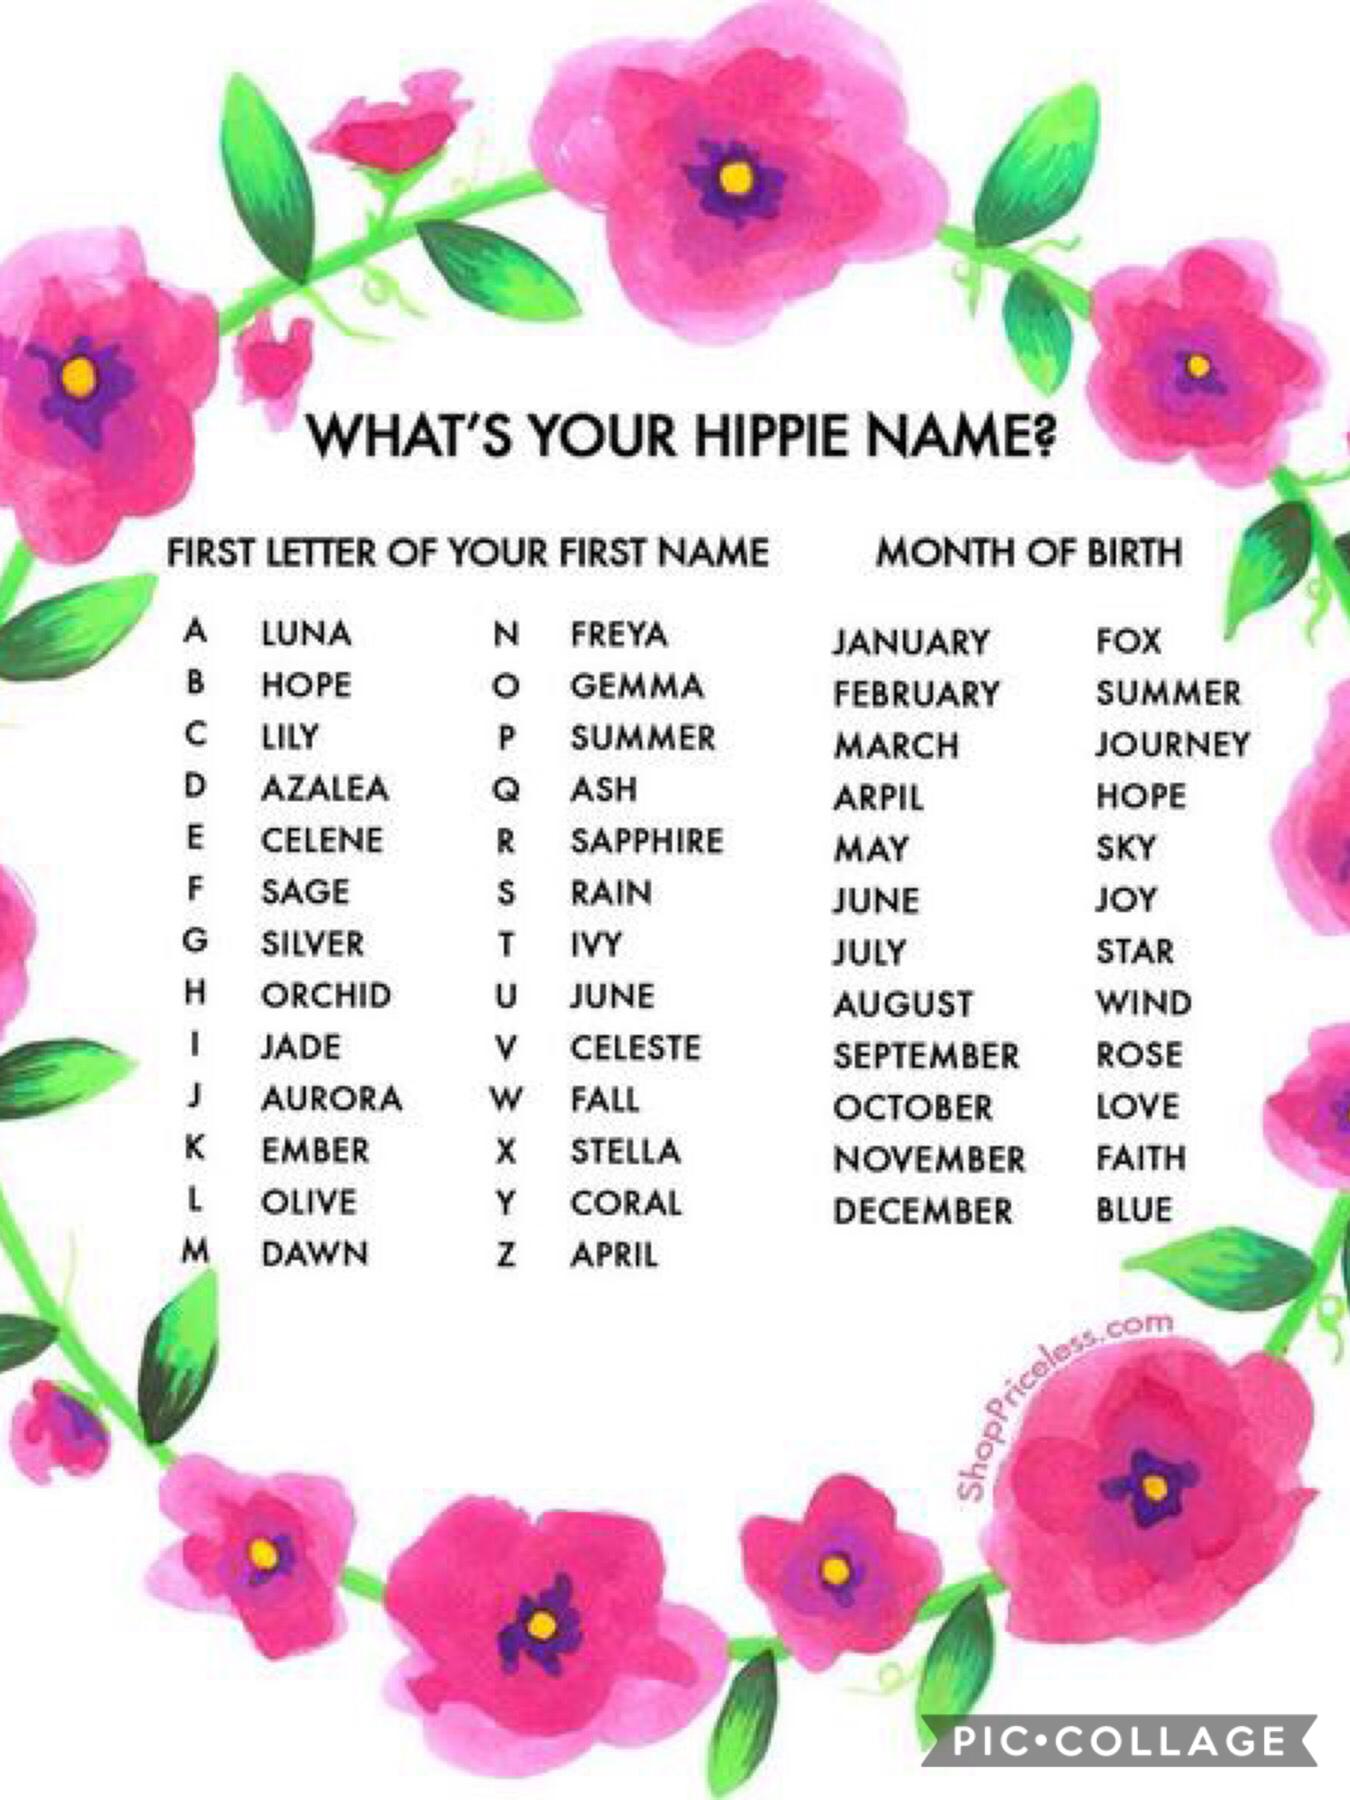 Comment your hippie name on here!